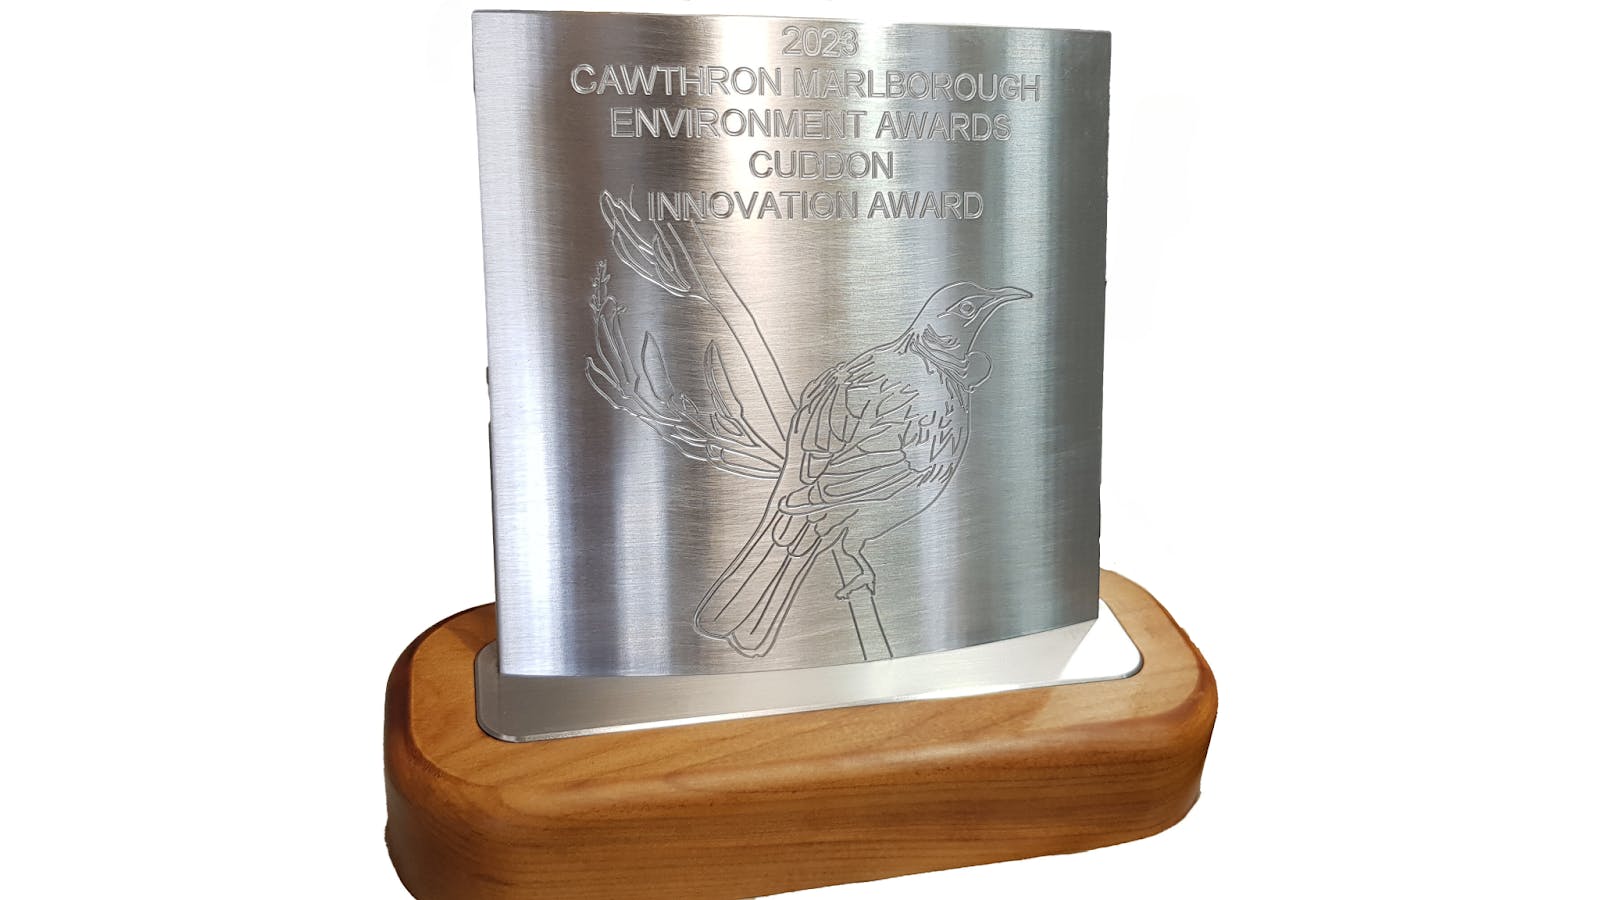 The award produced by the team at Cuddon 